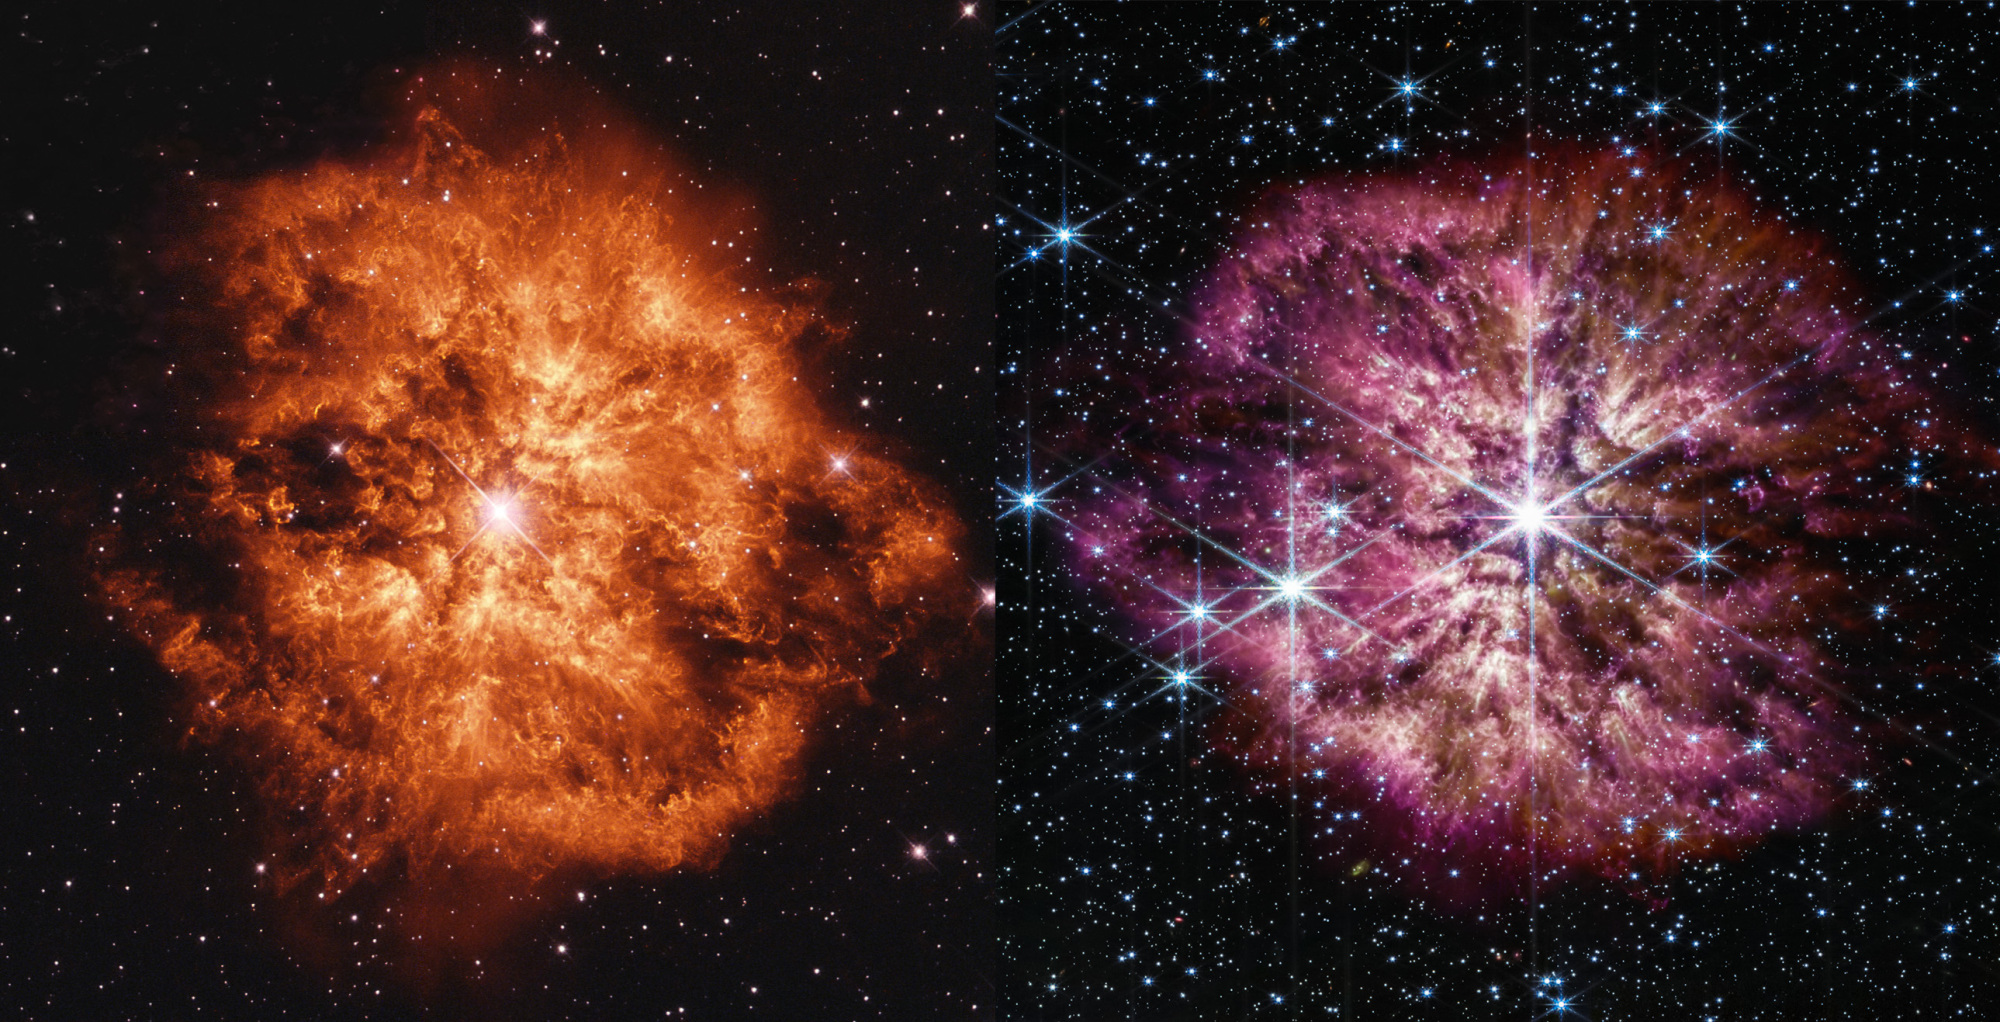 WR 124 images from Hubble and Webb